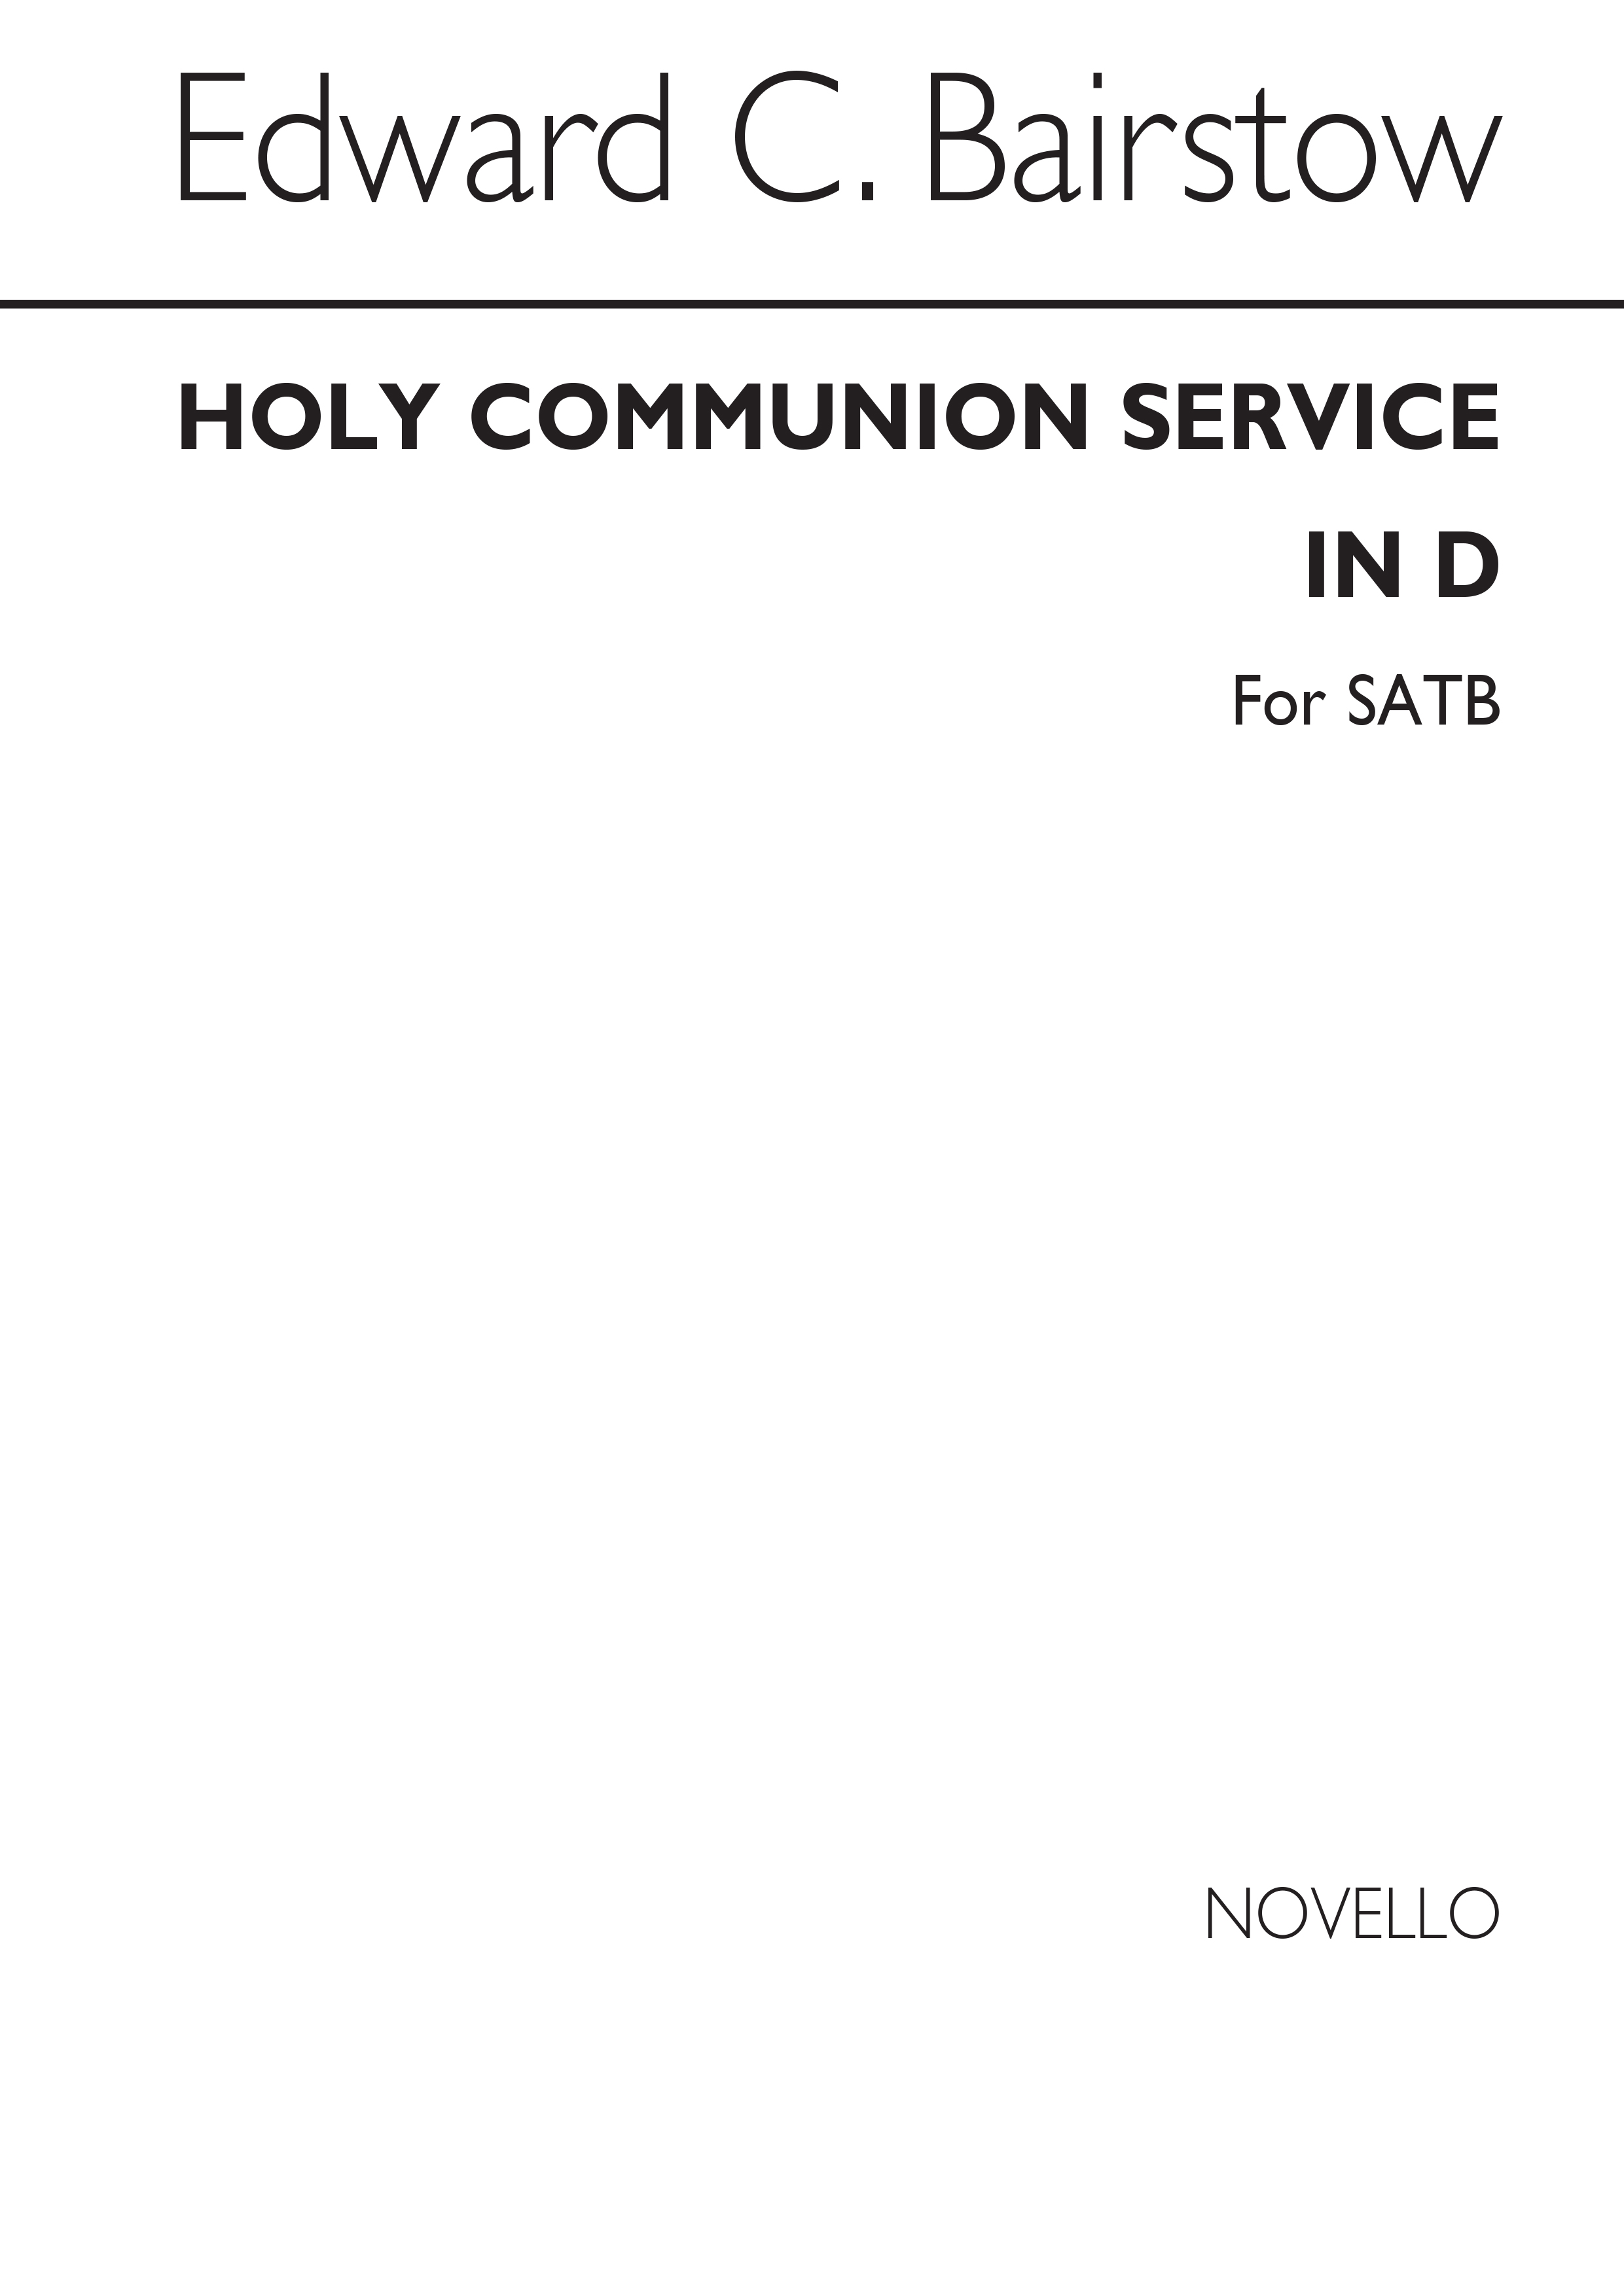 Edward Bairstow: Communion Service In D (Without Credo) - SATB